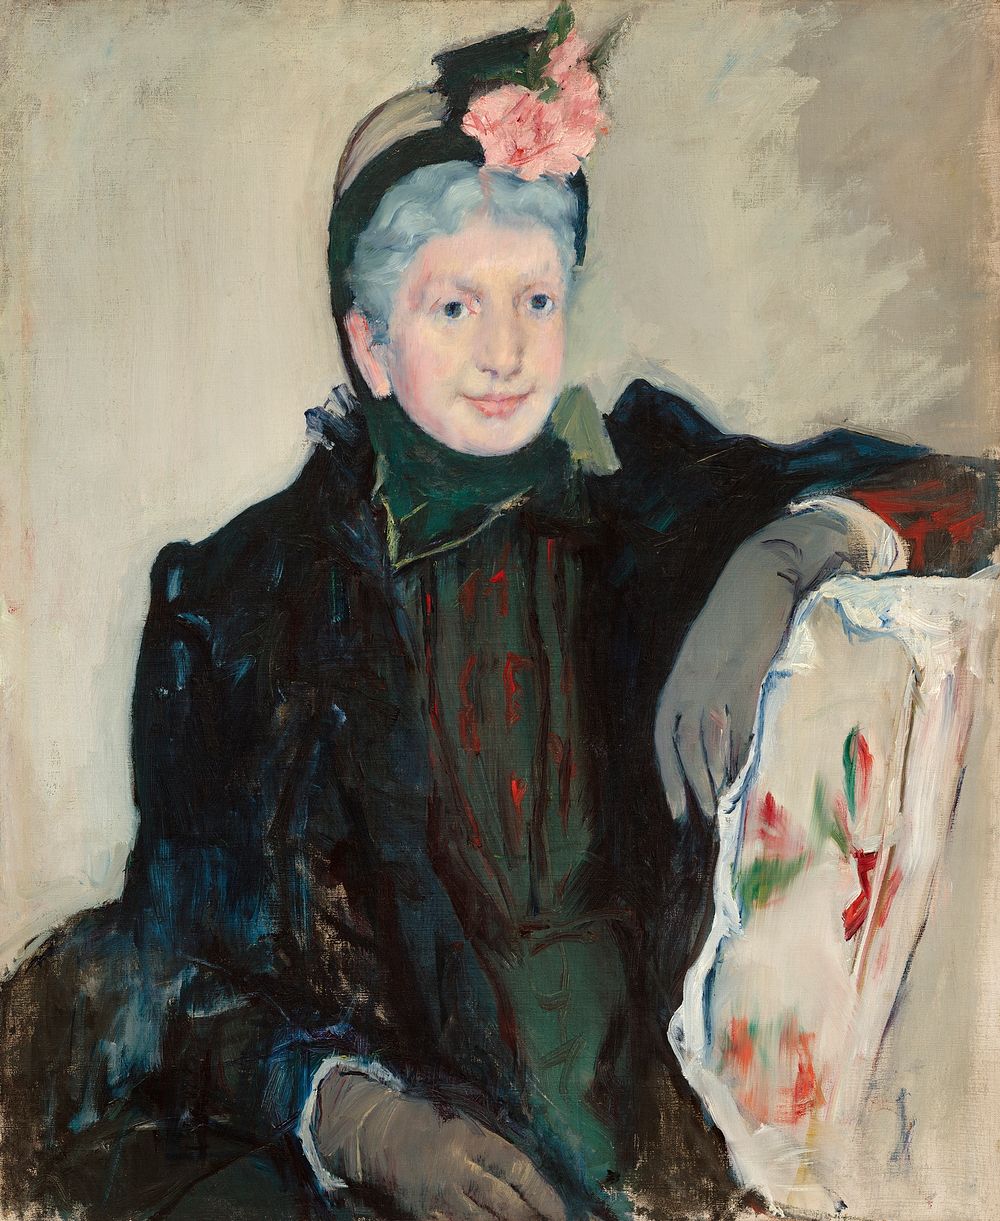 Portrait of an Elderly Lady (1887) by Mary Cassatt. Original portrait painting from The National Gallery of Art. Digitally…